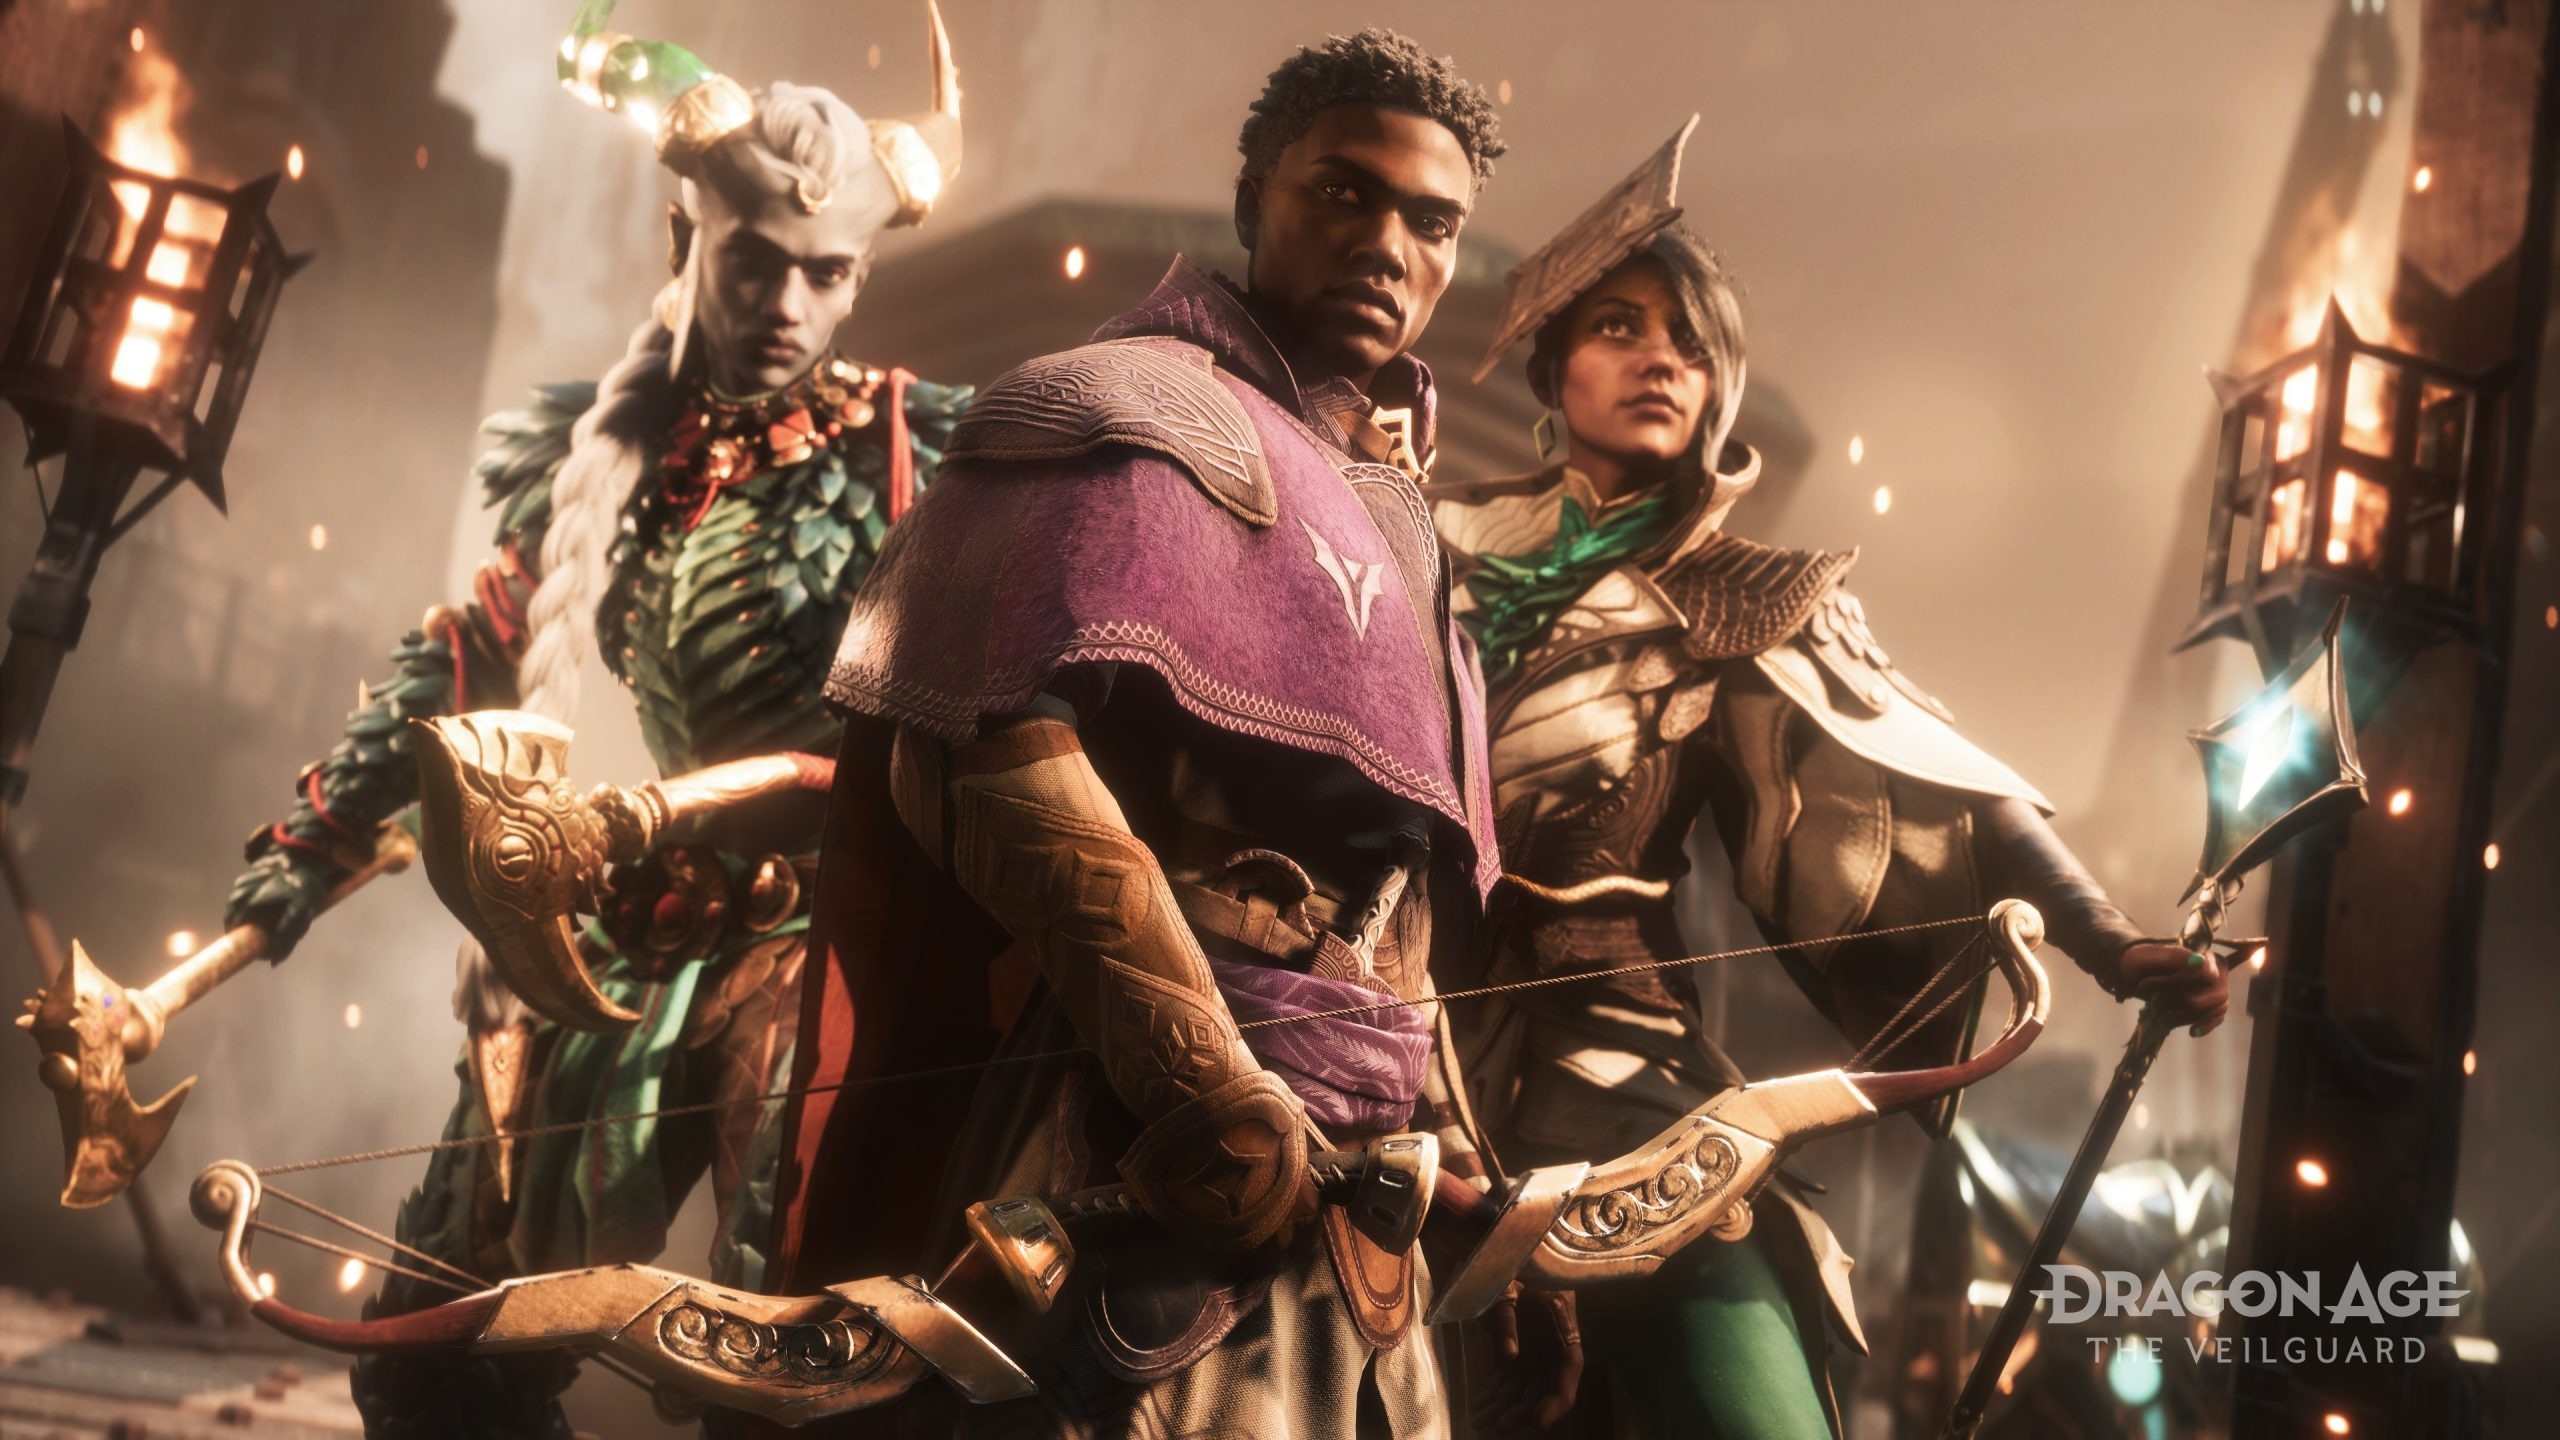 Dragon Age: The Voiceing Staff of The Veilguard Announced